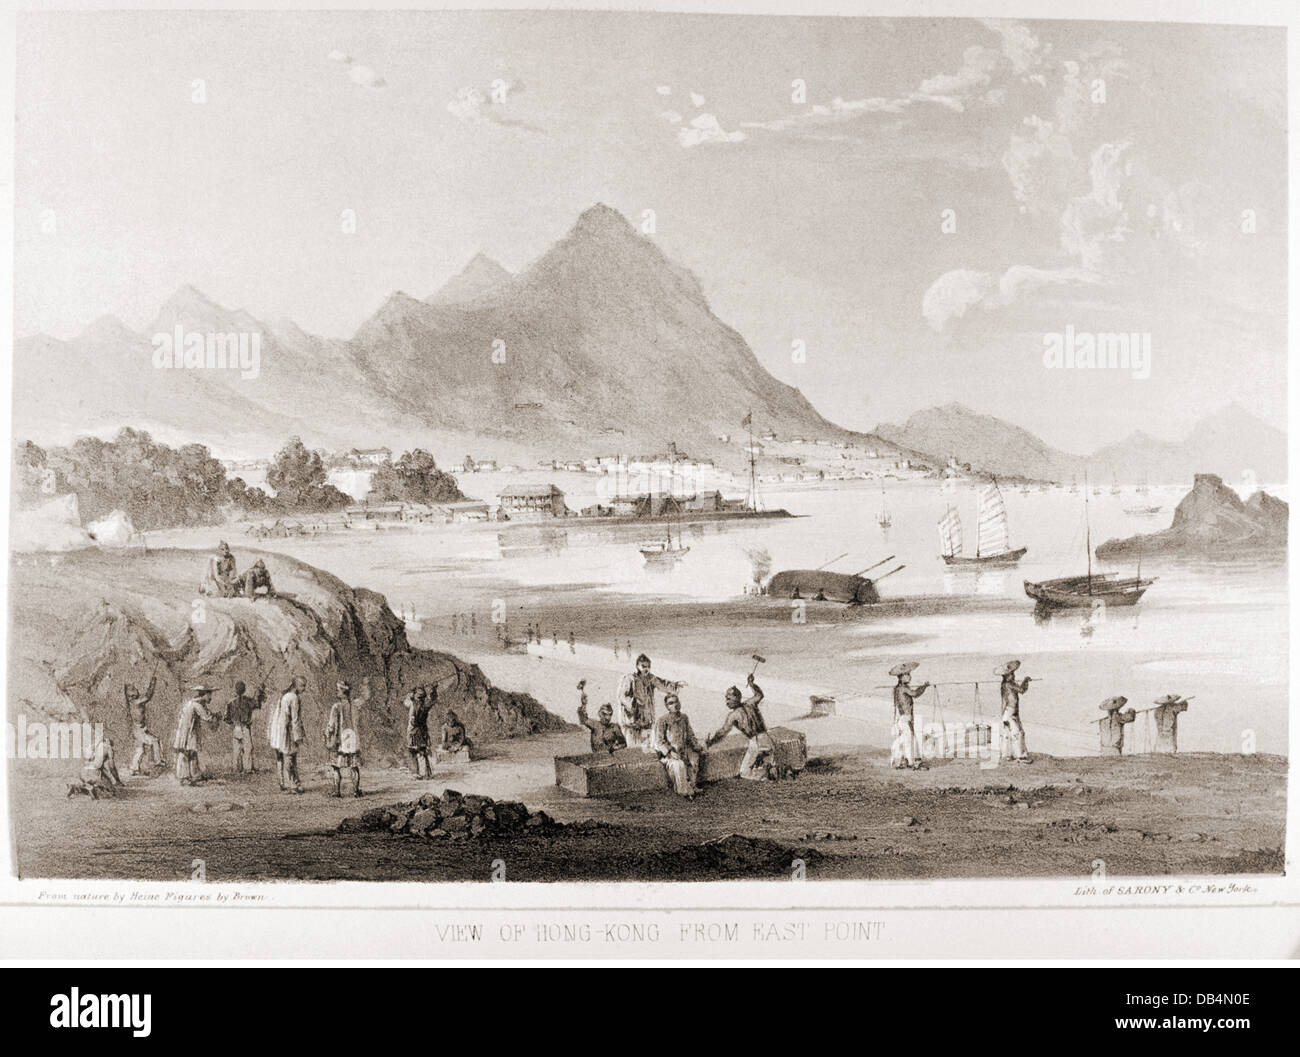 colonialism, China, British colony Hong Kong, view from East Point,  lithograph by P.S. Duval, after drawing by W. Heine, figures by Brown,  1853, Additional-Rights-Clearences-Not Available Stock Photo - Alamy